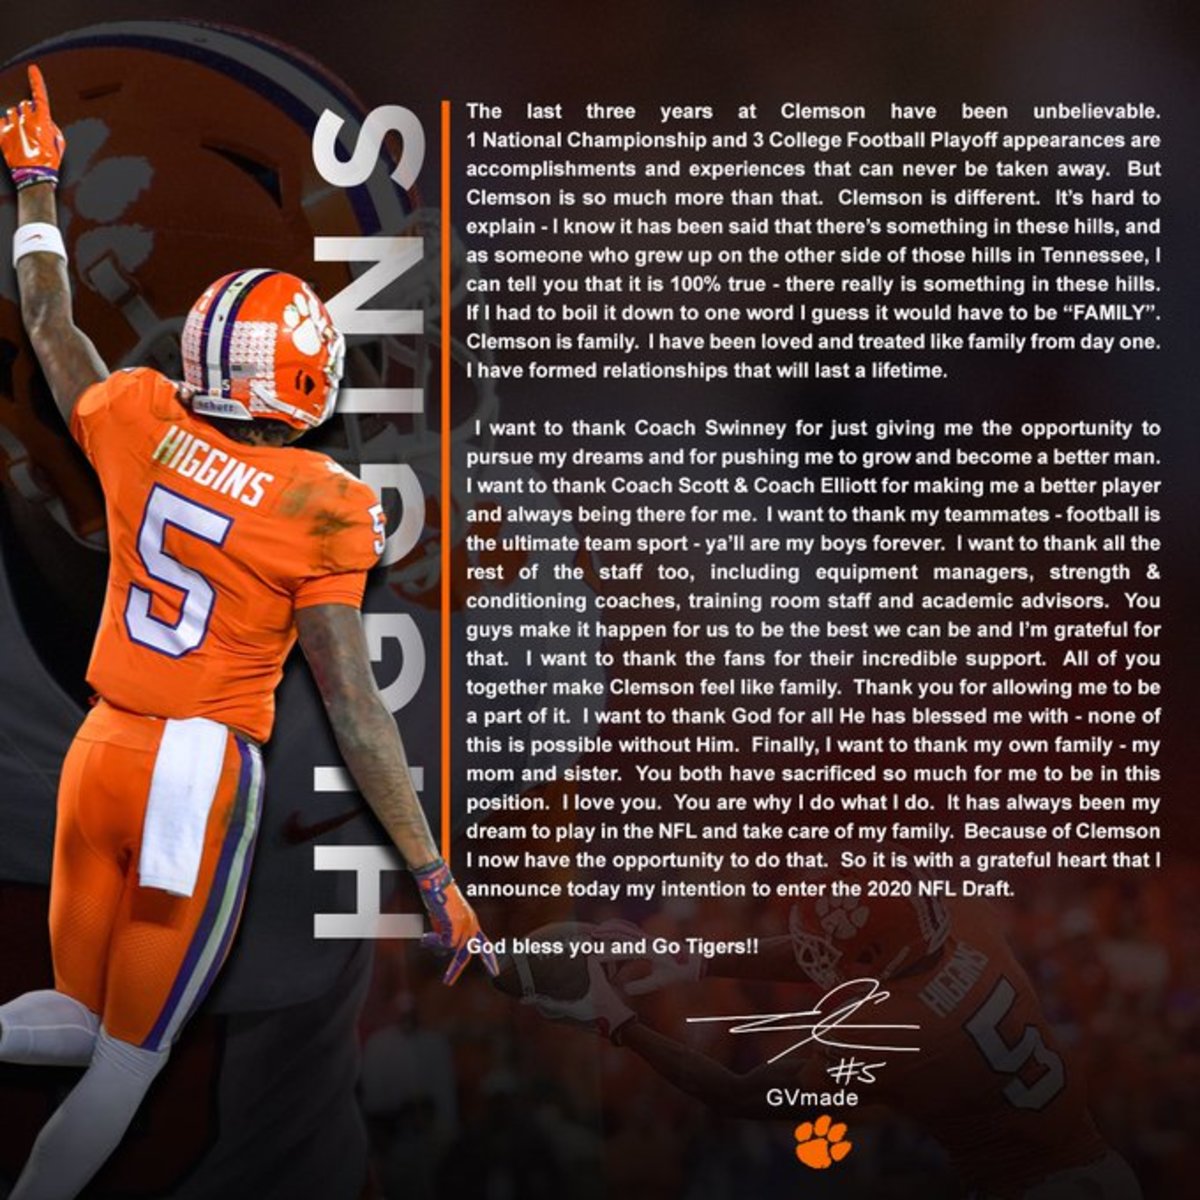 Tee Higgins posts on social media to announce his intentions to enter the 2020 NFL Draft.